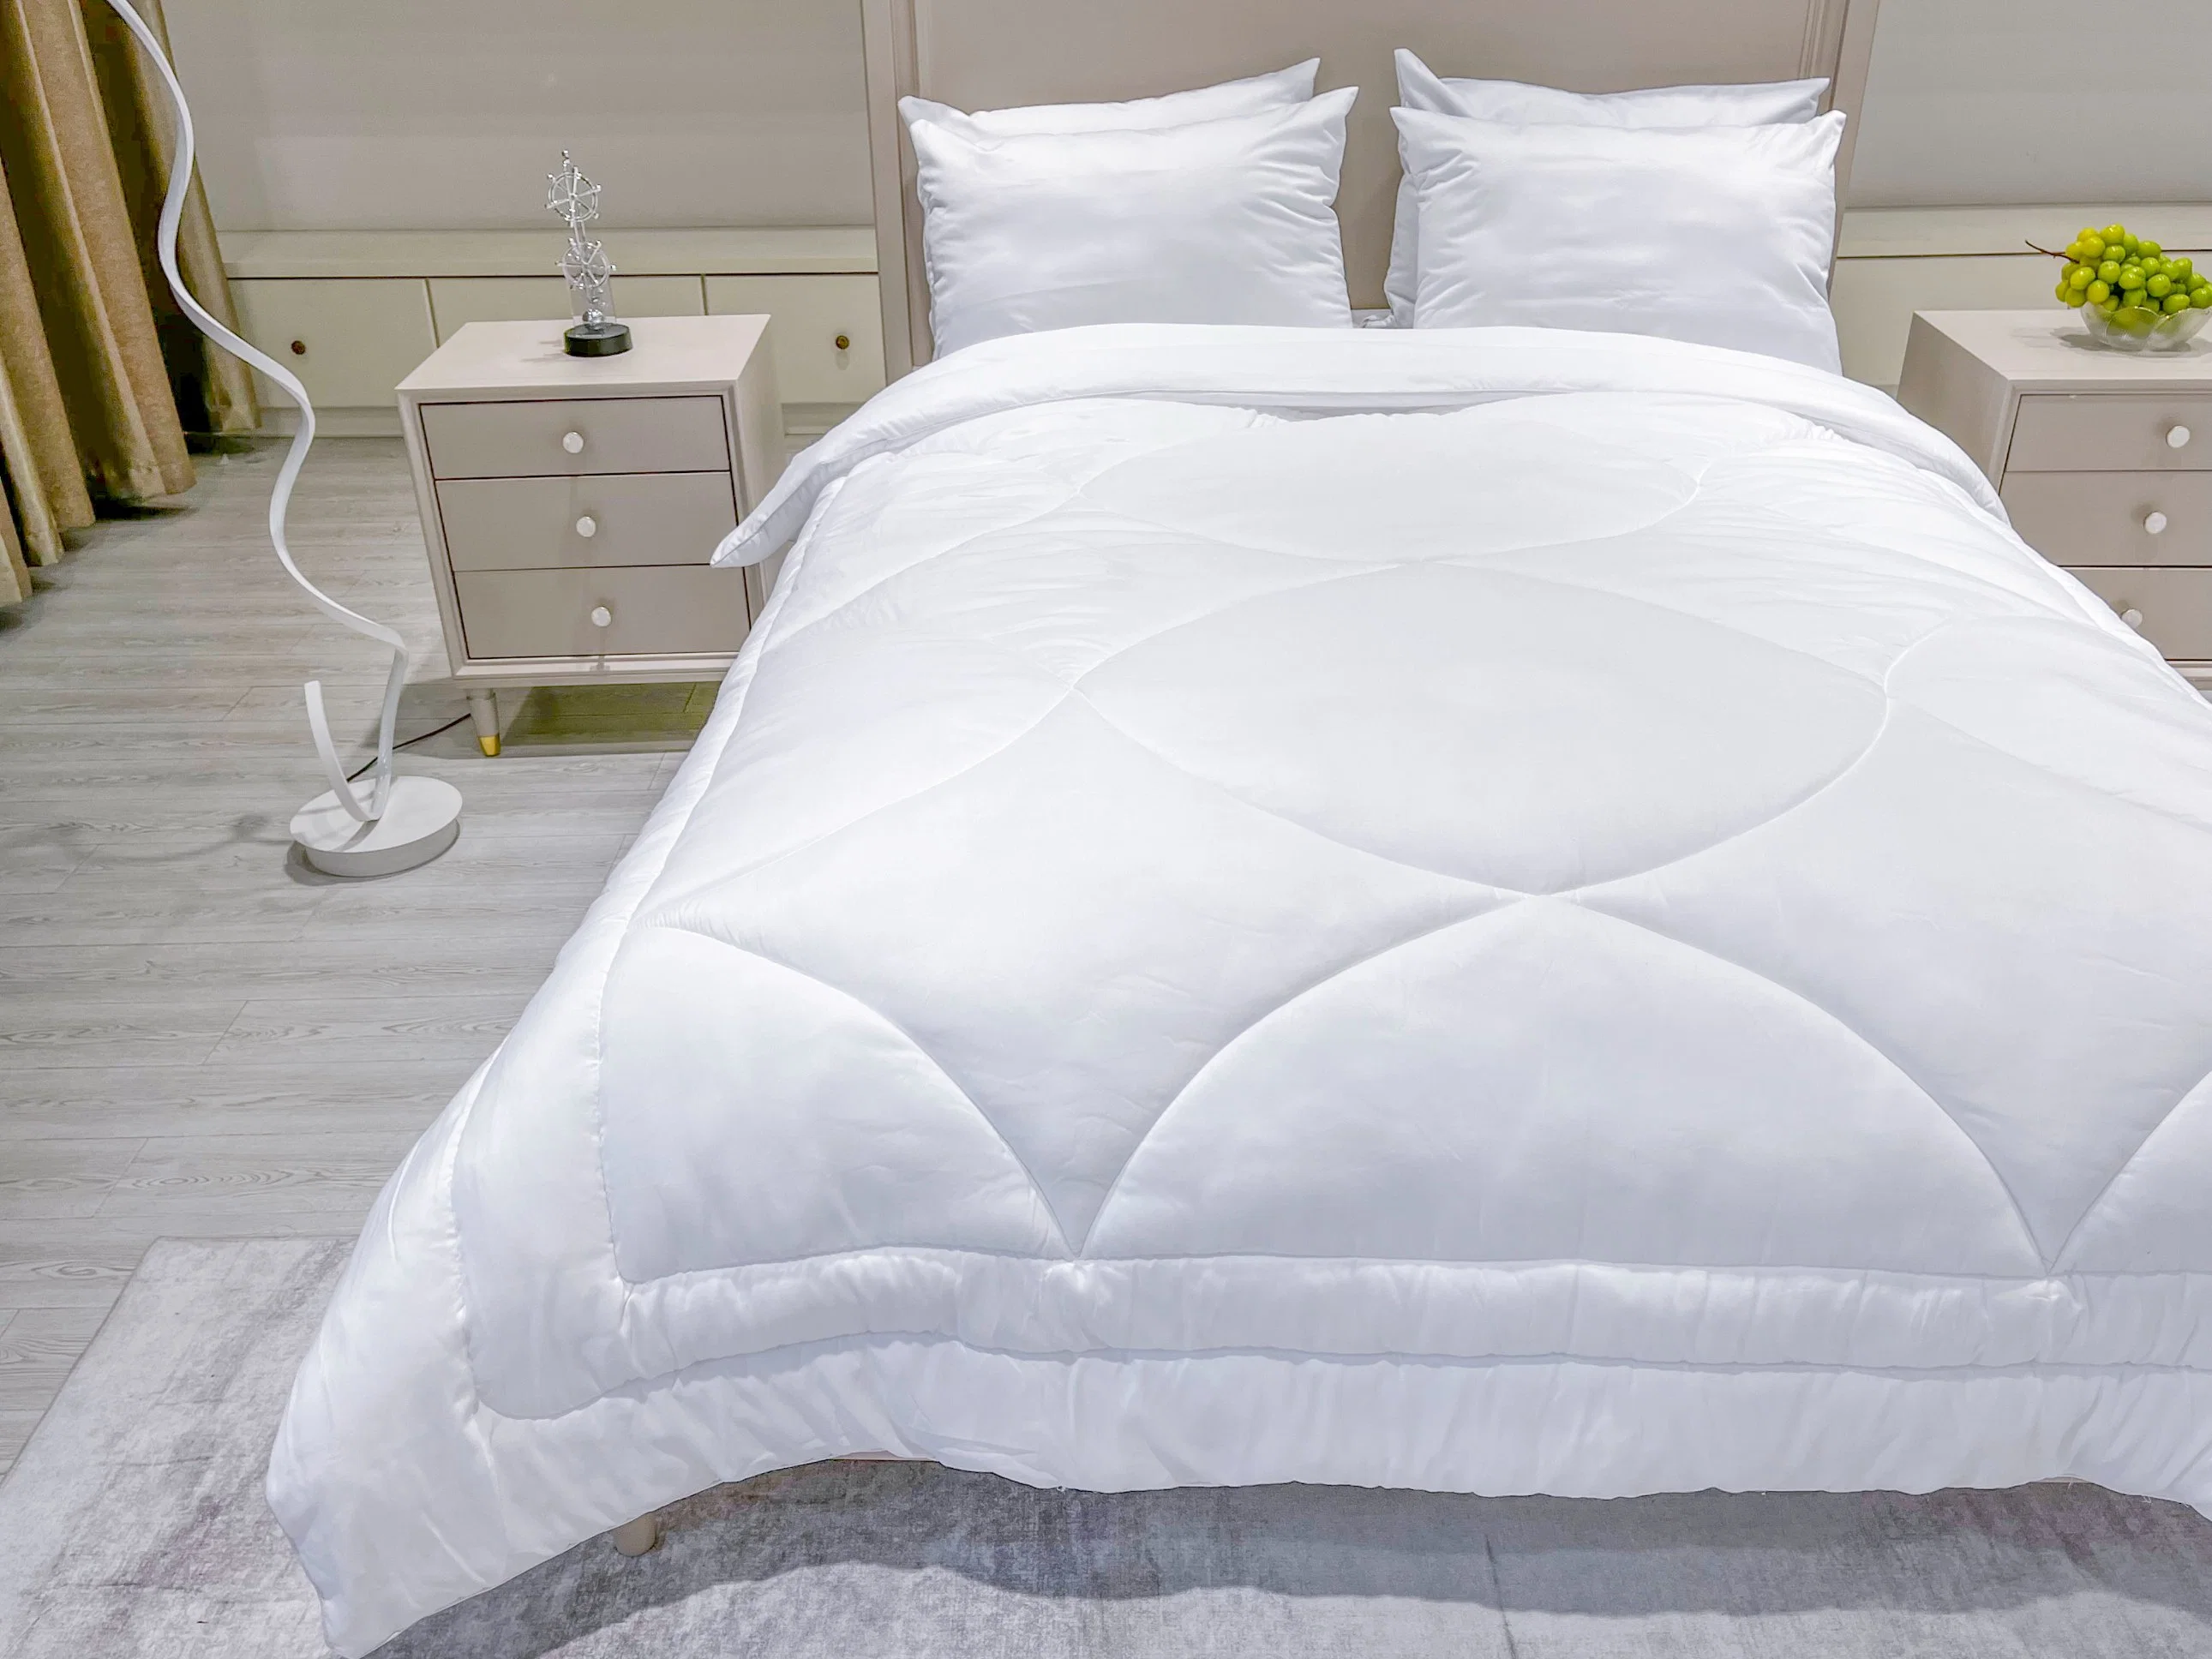 China Manufacturer Home Textile Nice Quality Cheap Price All Seasons Wholesale/Supplier New Stitching Design White Hotel Microfiber Polyester Quilted Fluffy Duvet